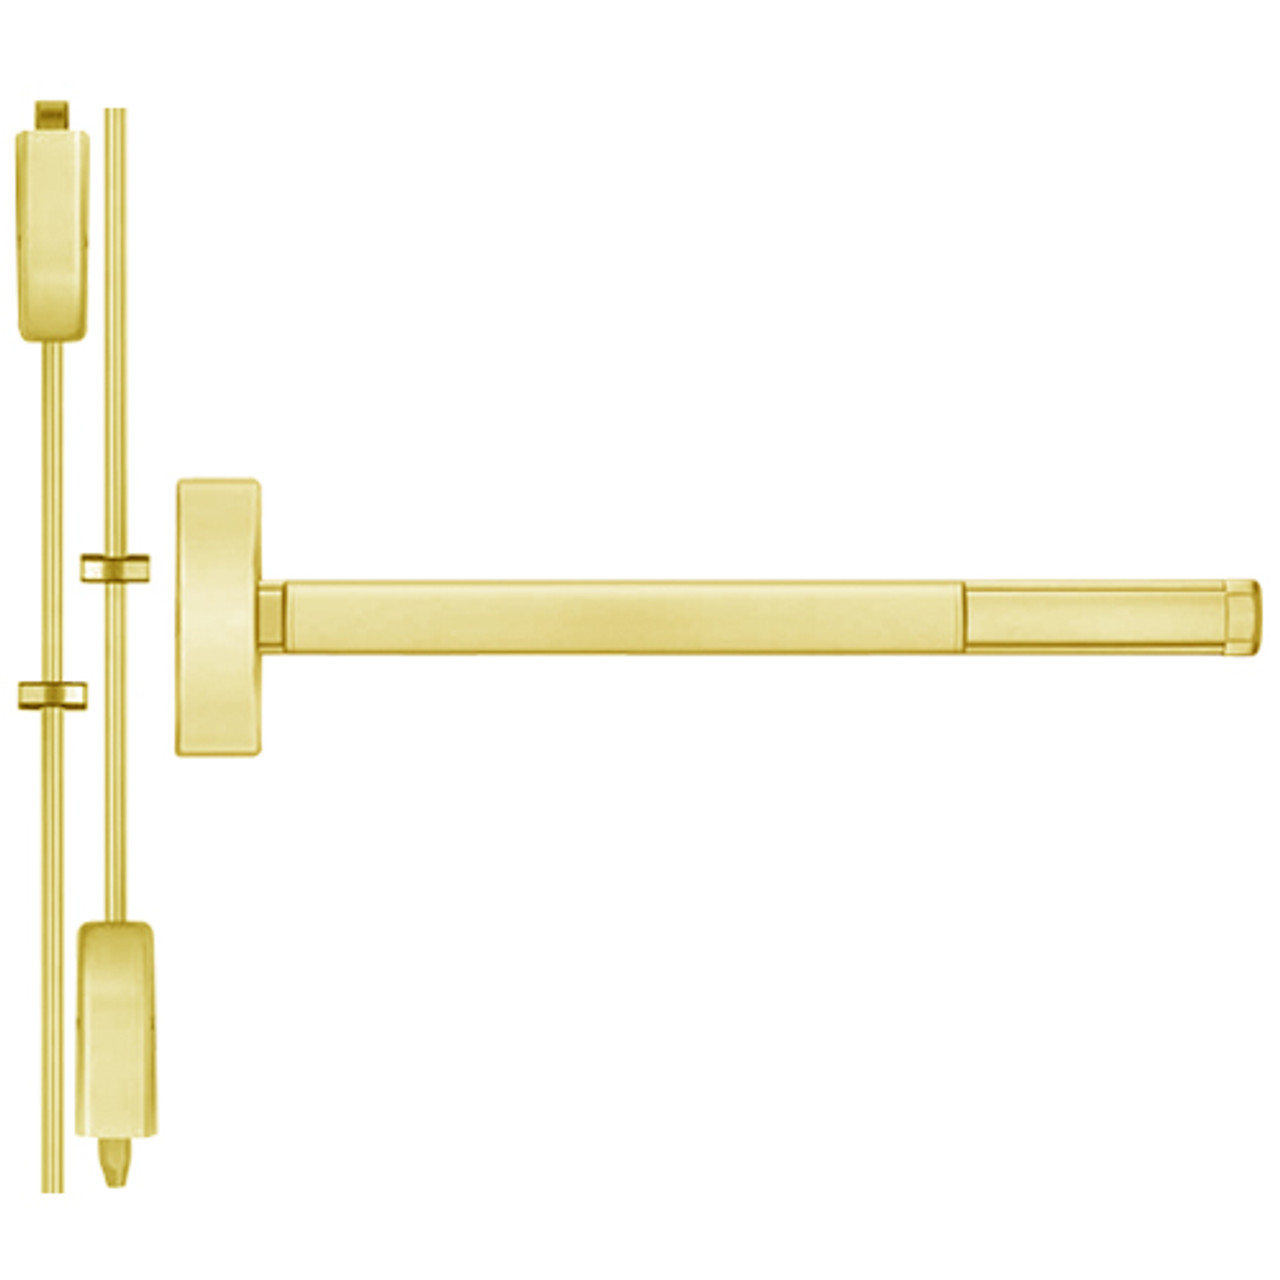 TS2208LBR-605-36 PHI 2200 Series Non Fire Rated Apex Surface Vertical Rod Device with Touchbar Monitoring Switch Prepped for Key Controls Lever/Knob in Bright Brass Finish